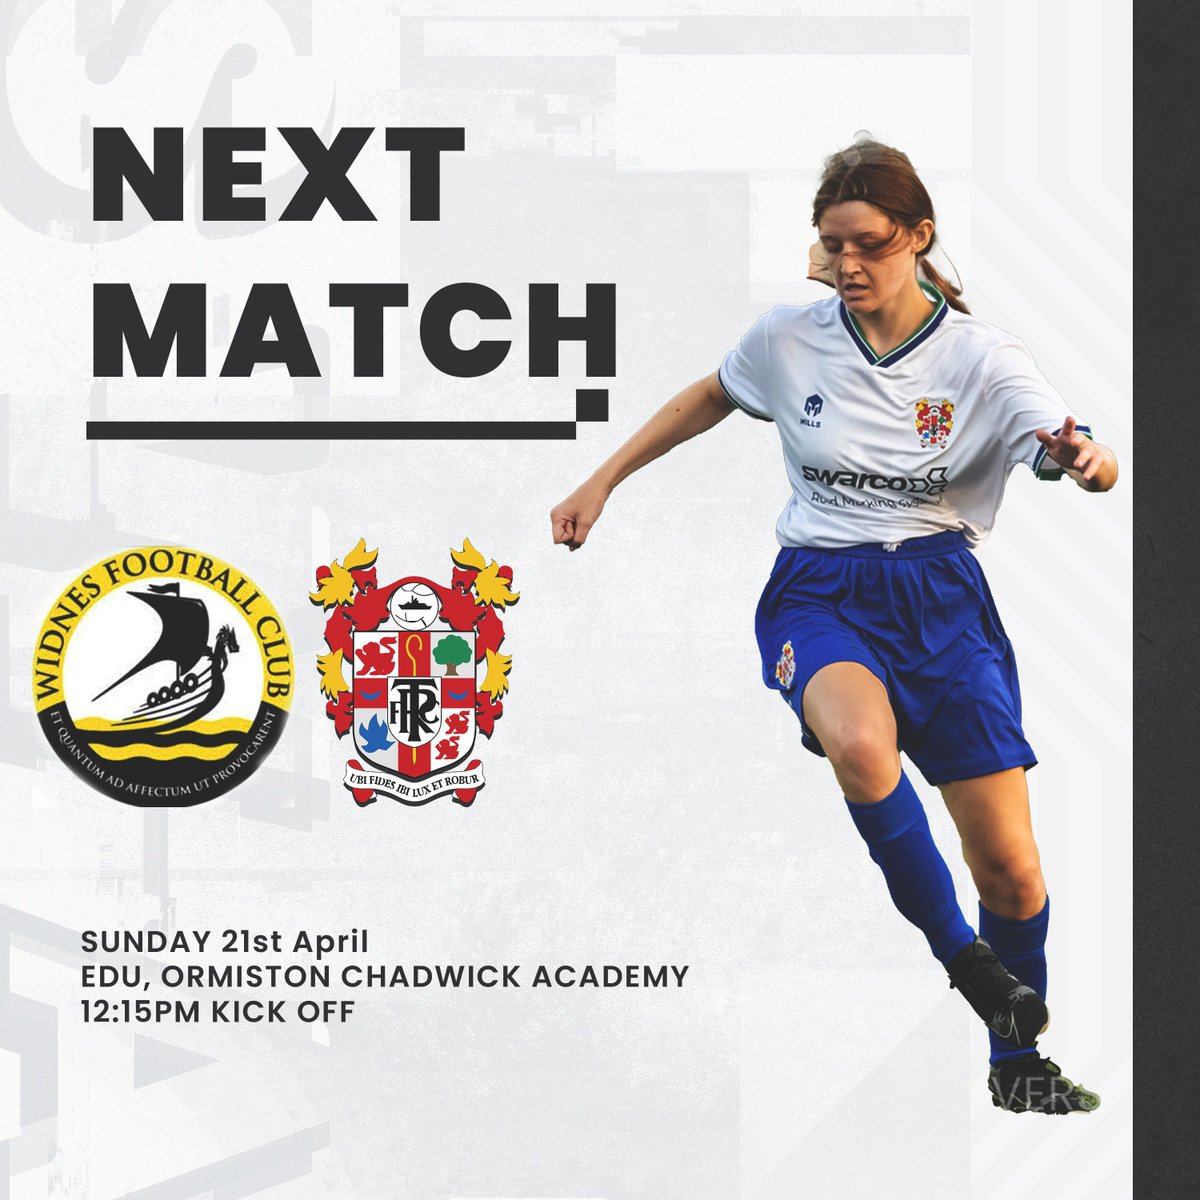 📅The Development Team face Widnes FC in a Friendly match on Sunday as they prepare for their final fixtures of the season. #TRFC #SWA